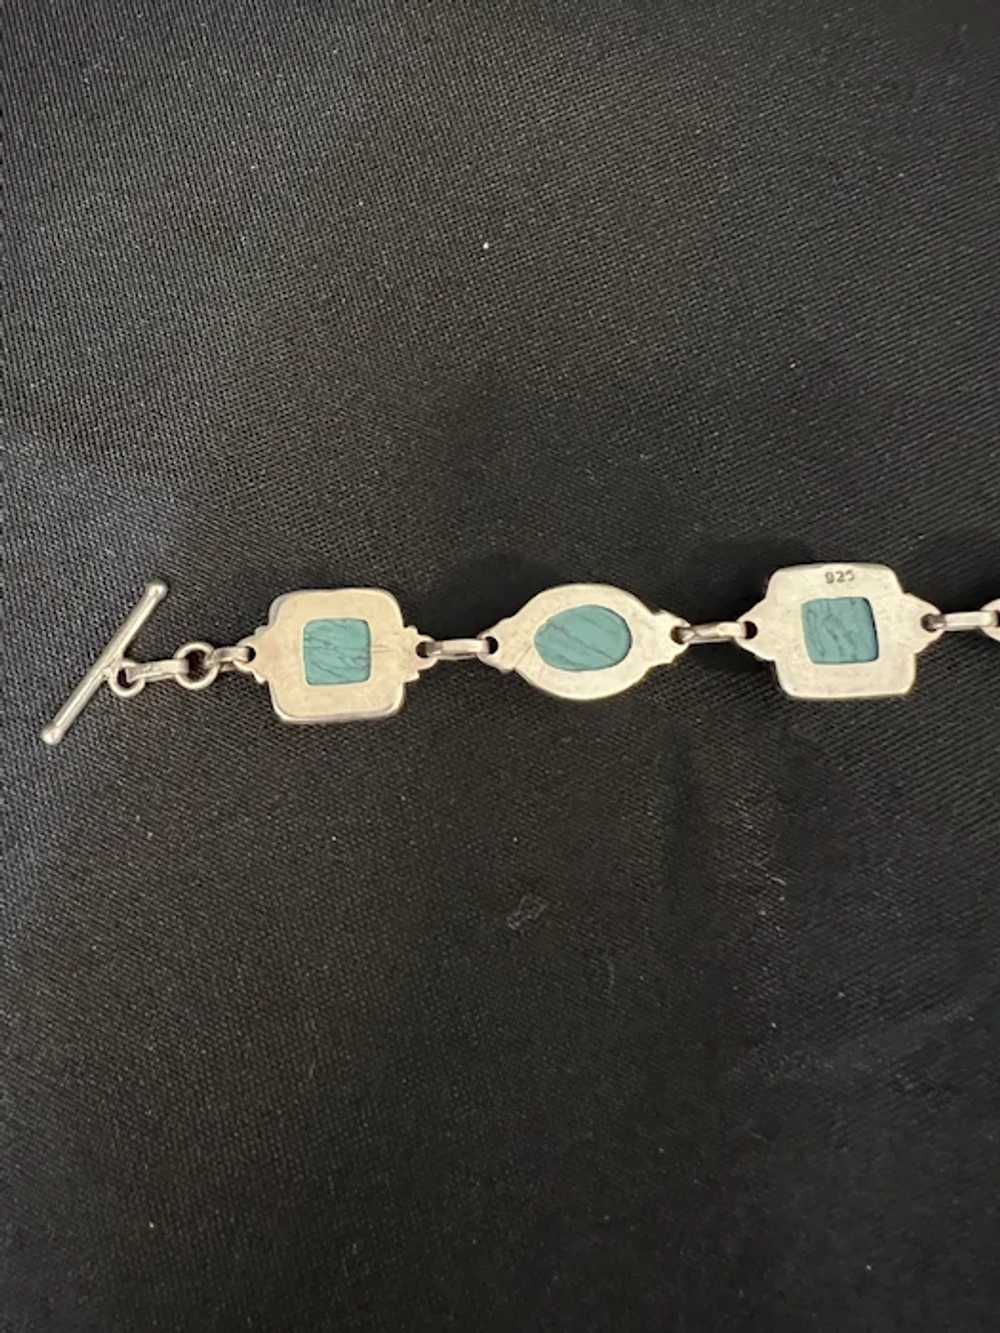 925 Sterling Silver and Turquoise Bracelet - image 6